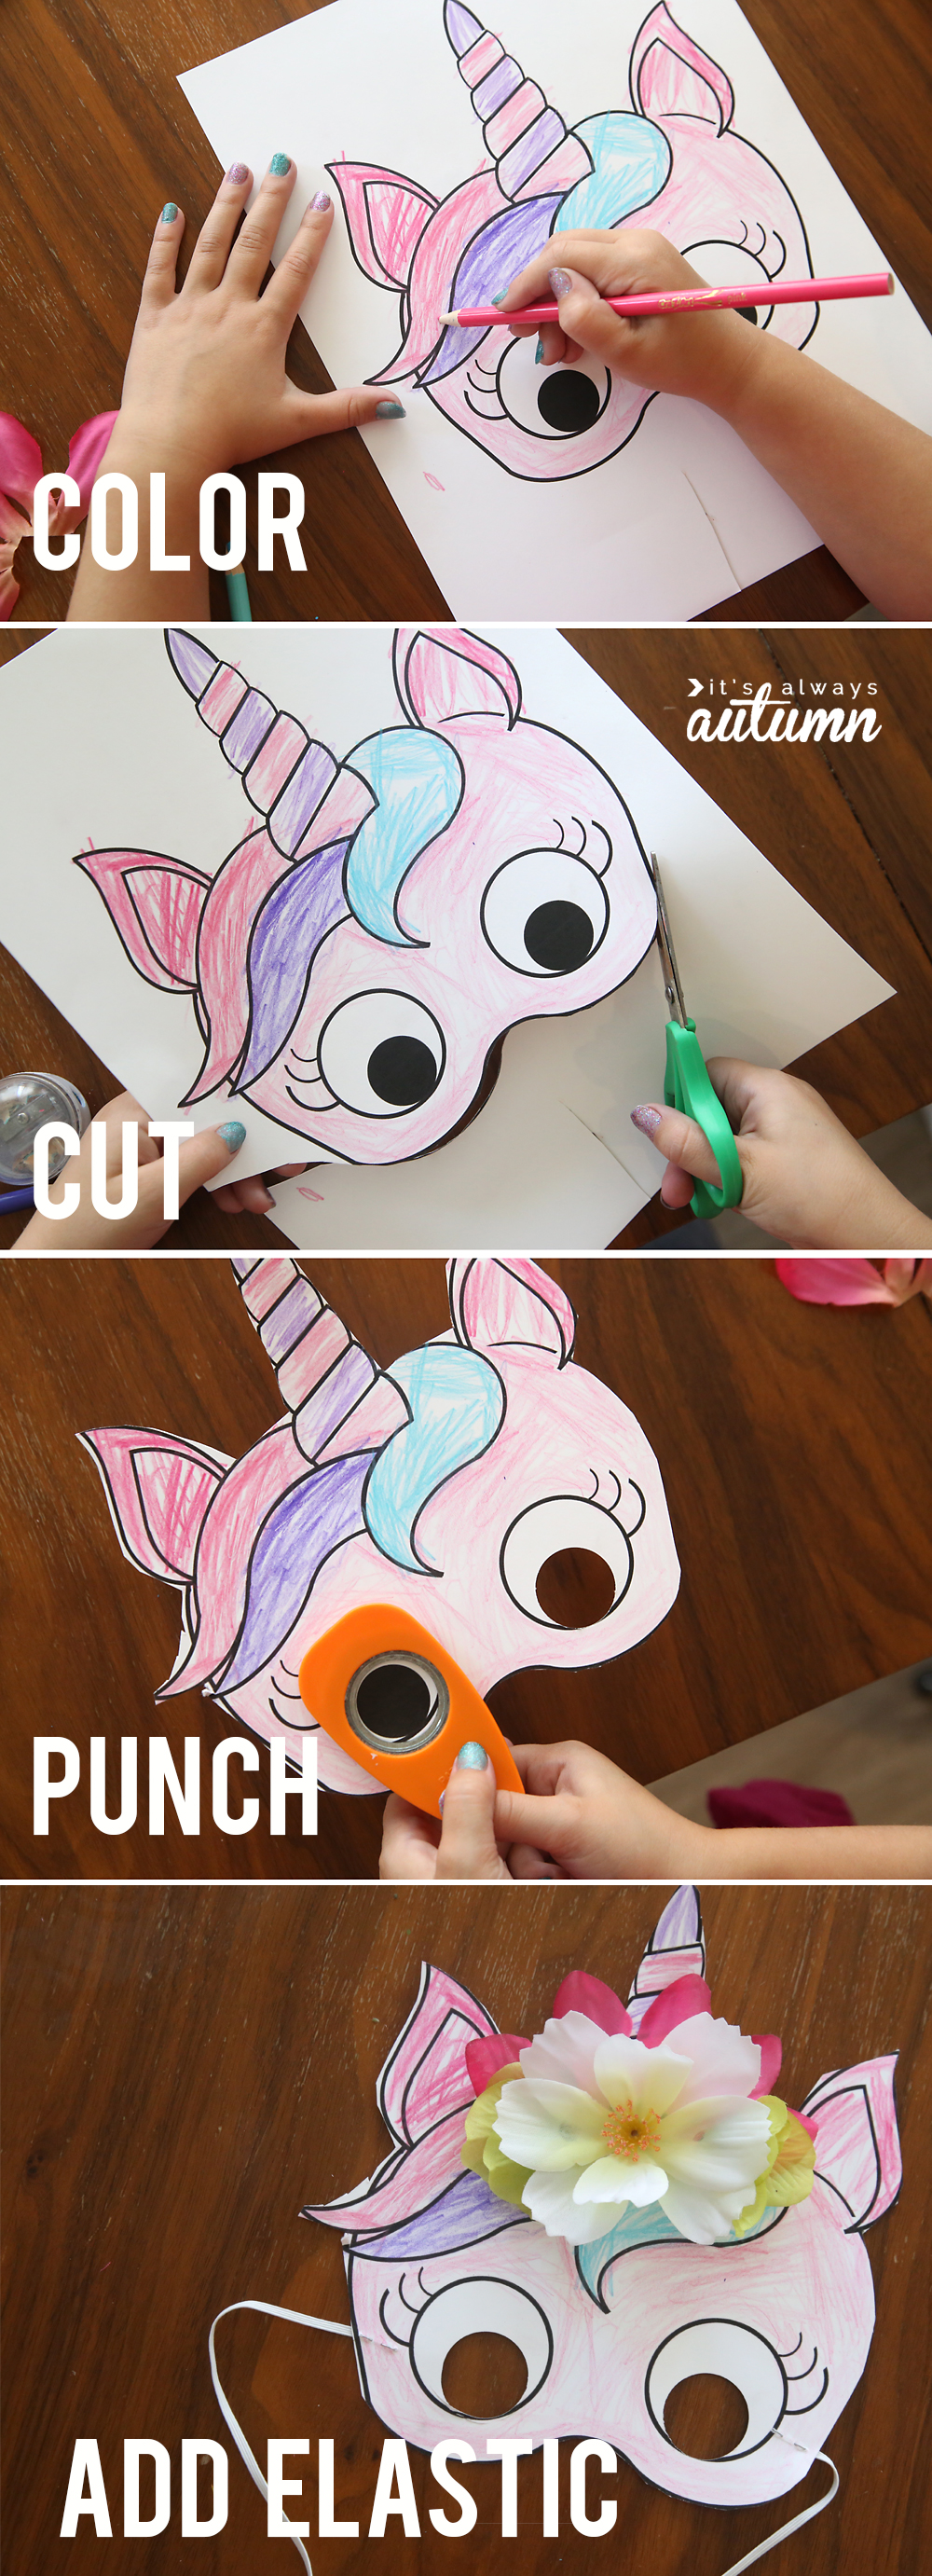 Cutting out paper unicorn mask, using large hold punch to punch out eye holes, adding elastic